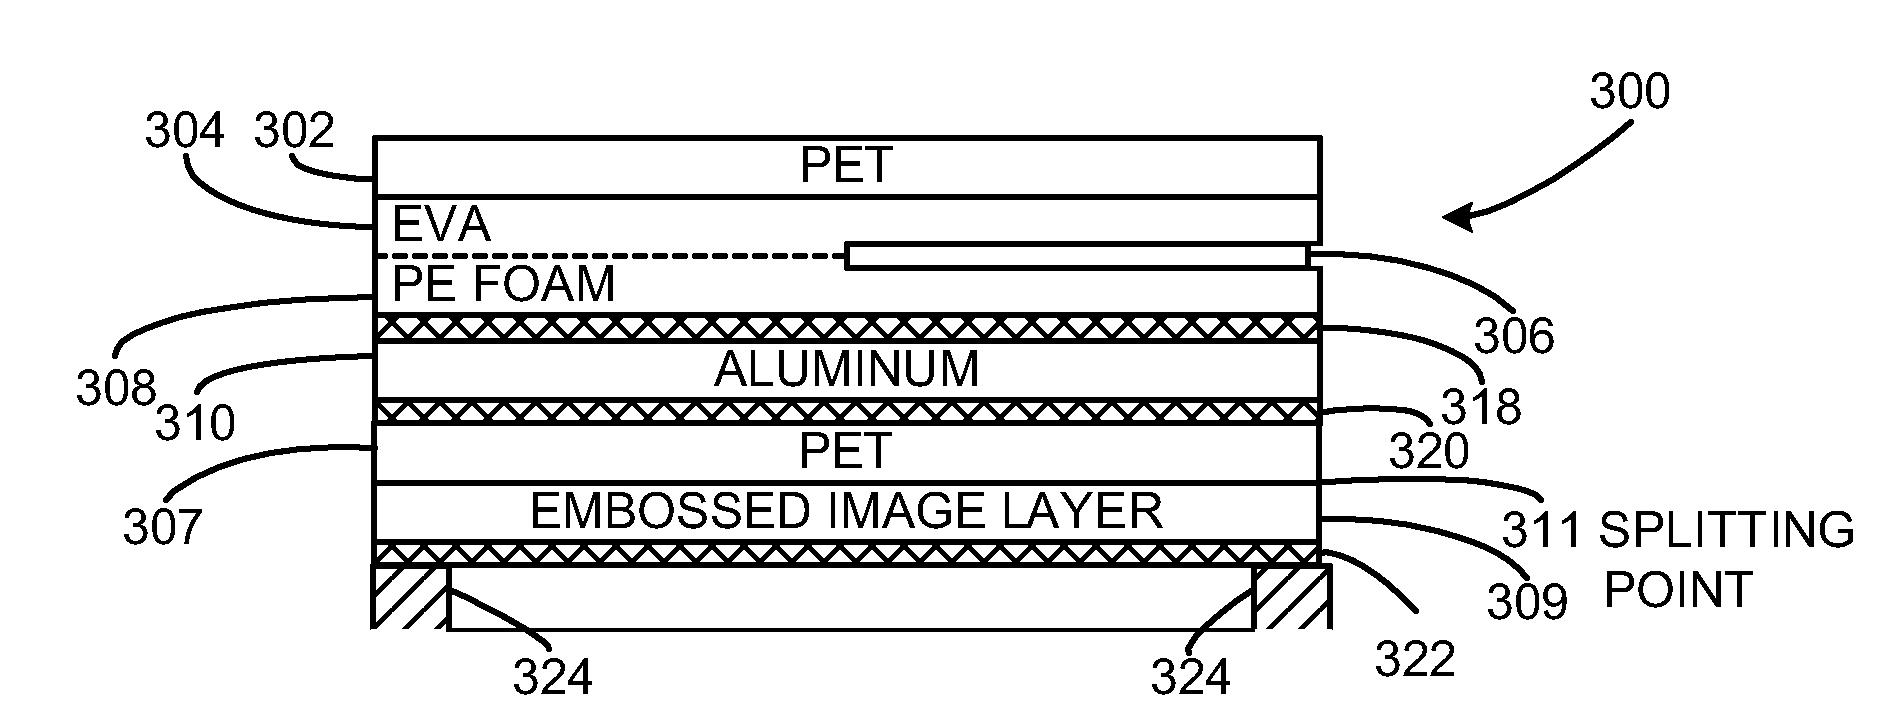 Container seal with removal tab and piercable holographic security seal